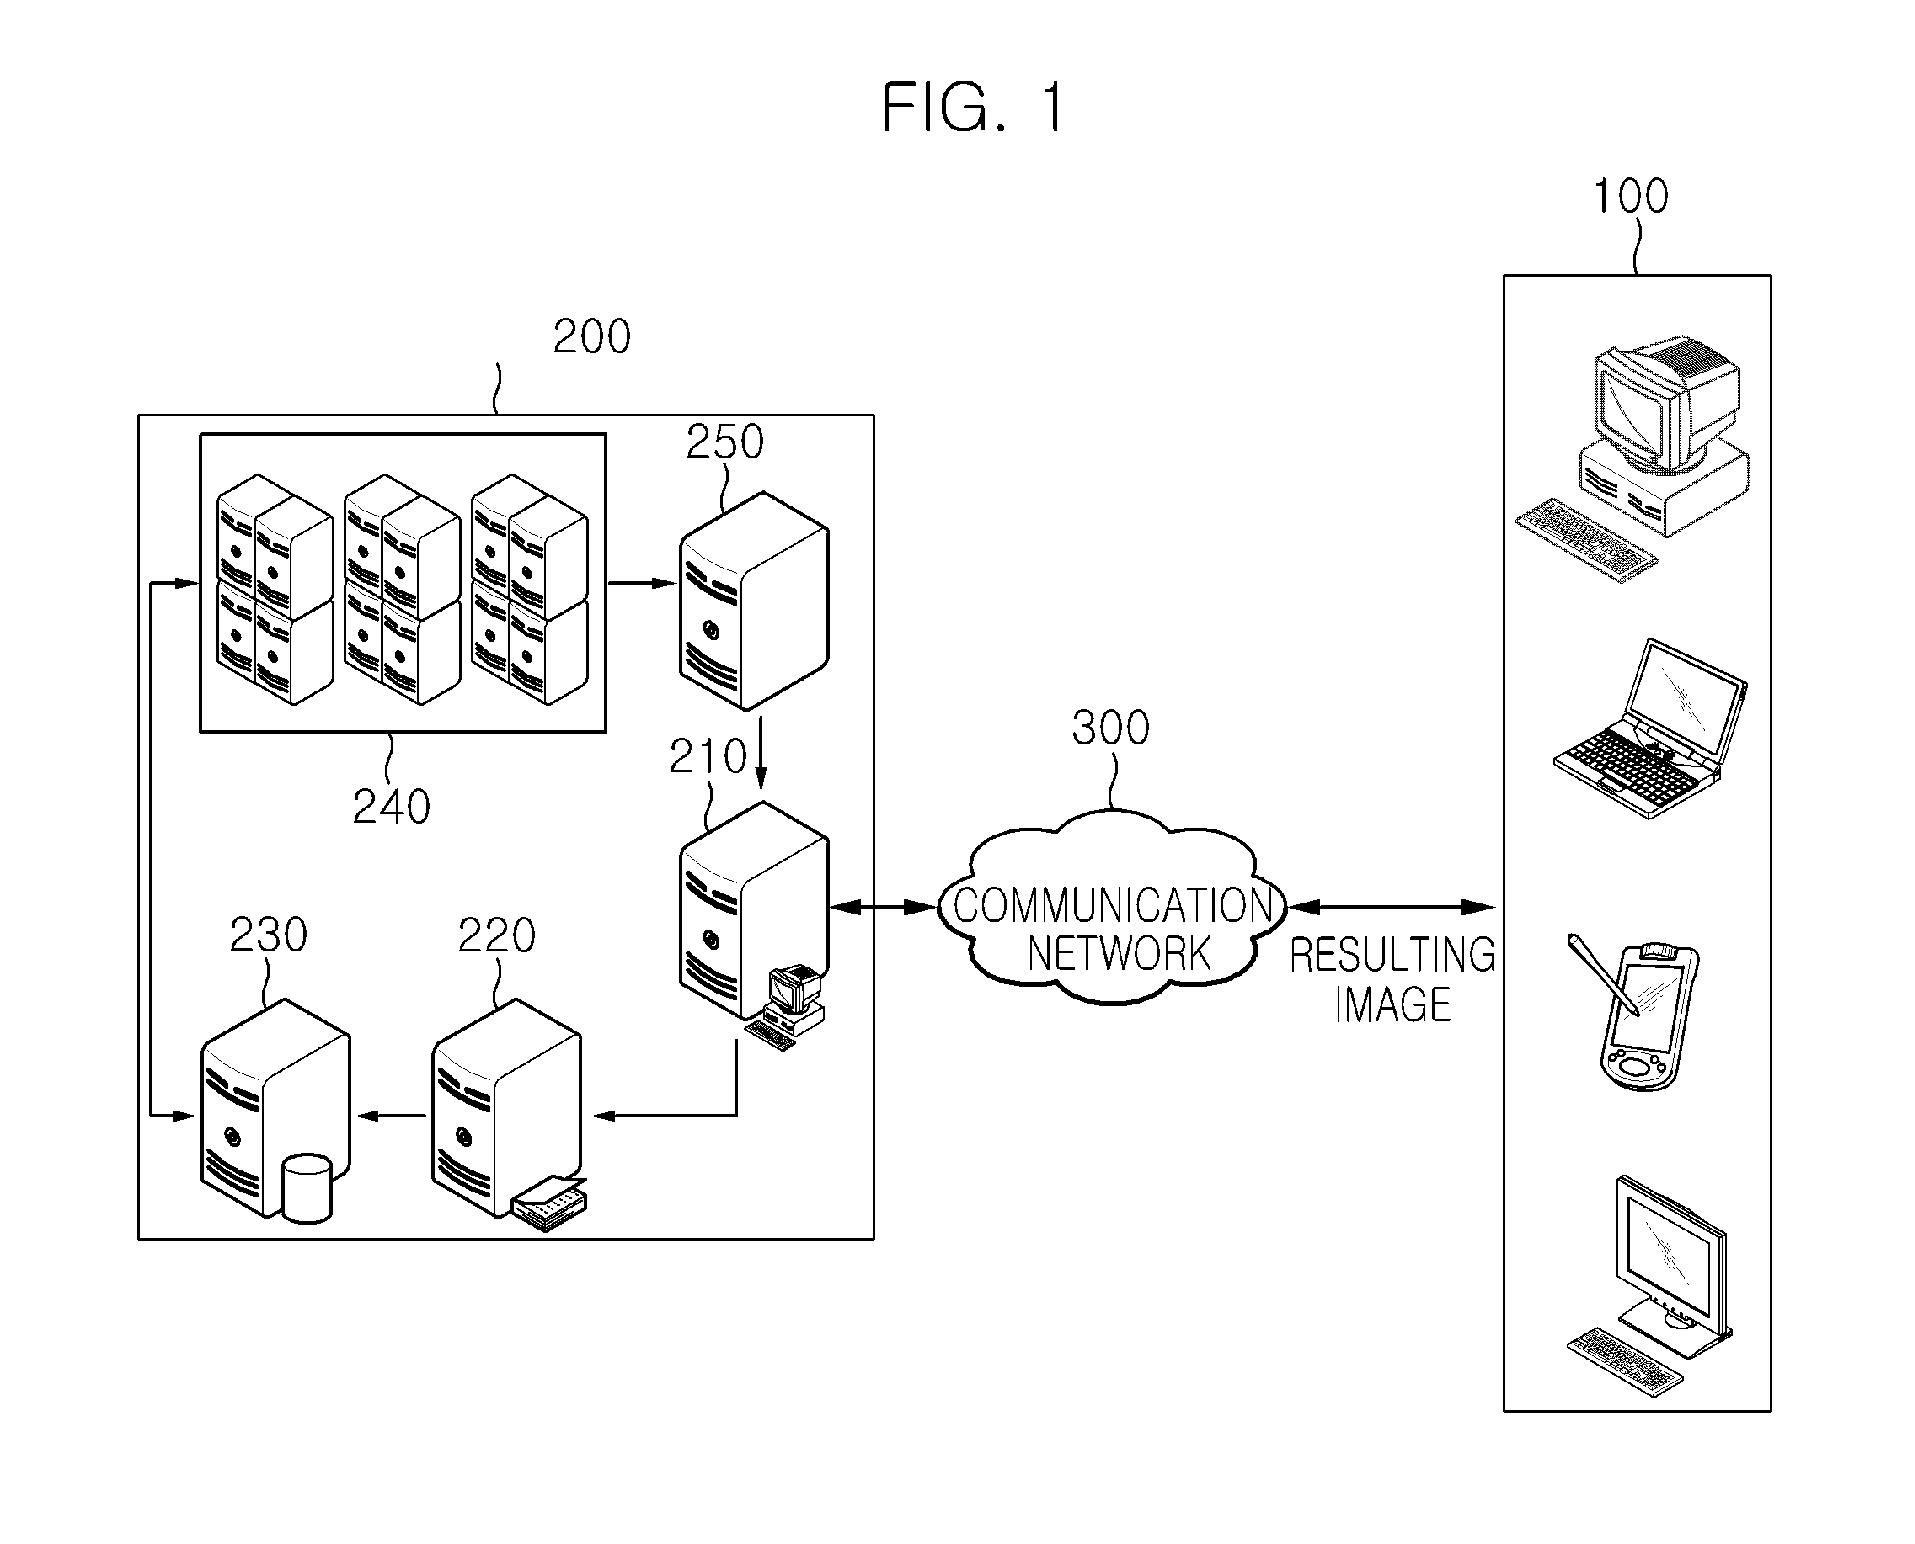 Method of reusing physics simulation results and game service apparatus using the same